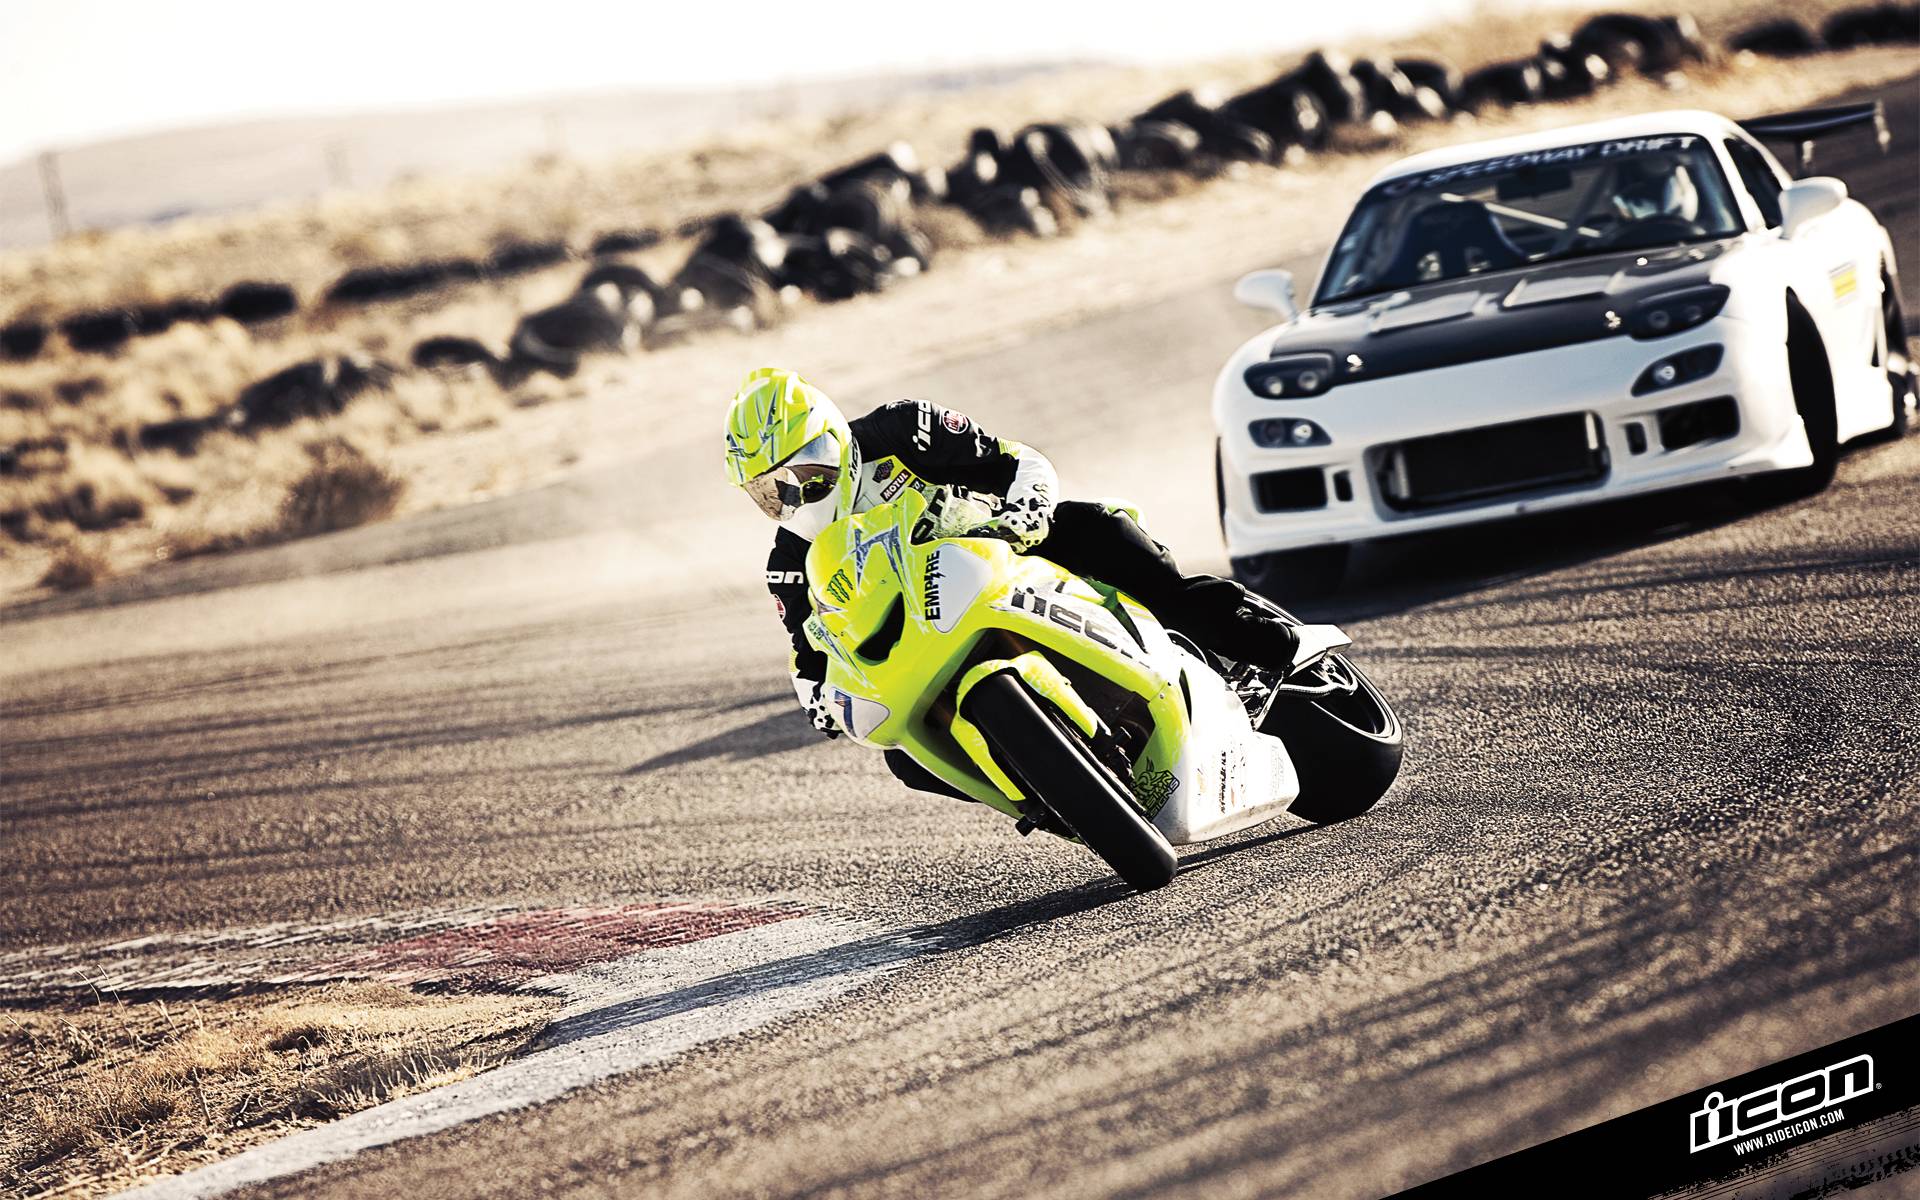 Download the RX7 and Sport Bike Drift Wallpaper, RX7 and Sport Bike